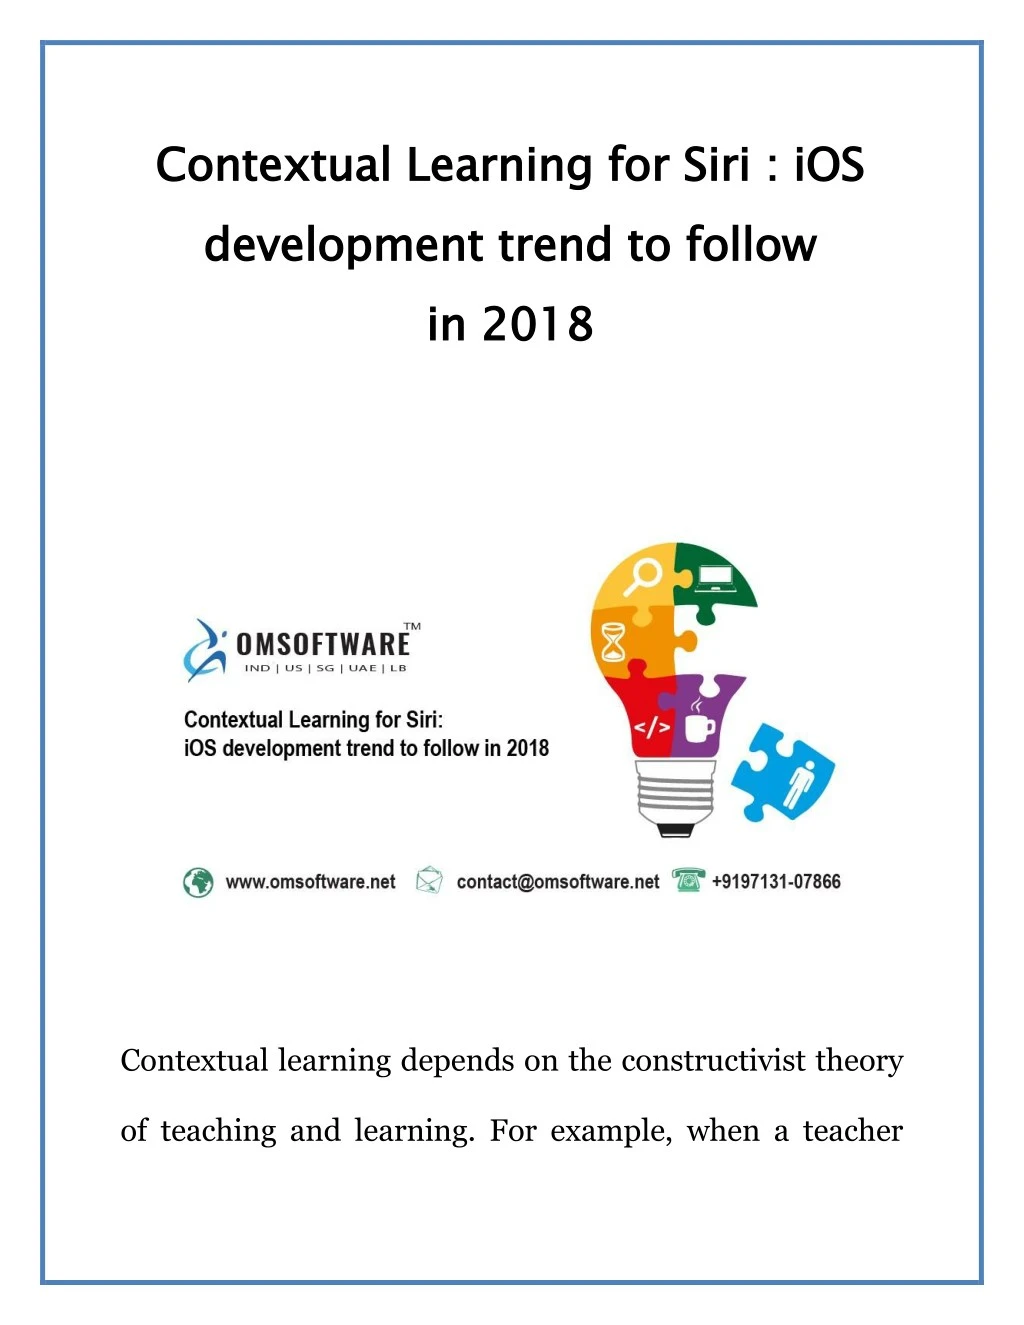 contextual learning for siri development trend